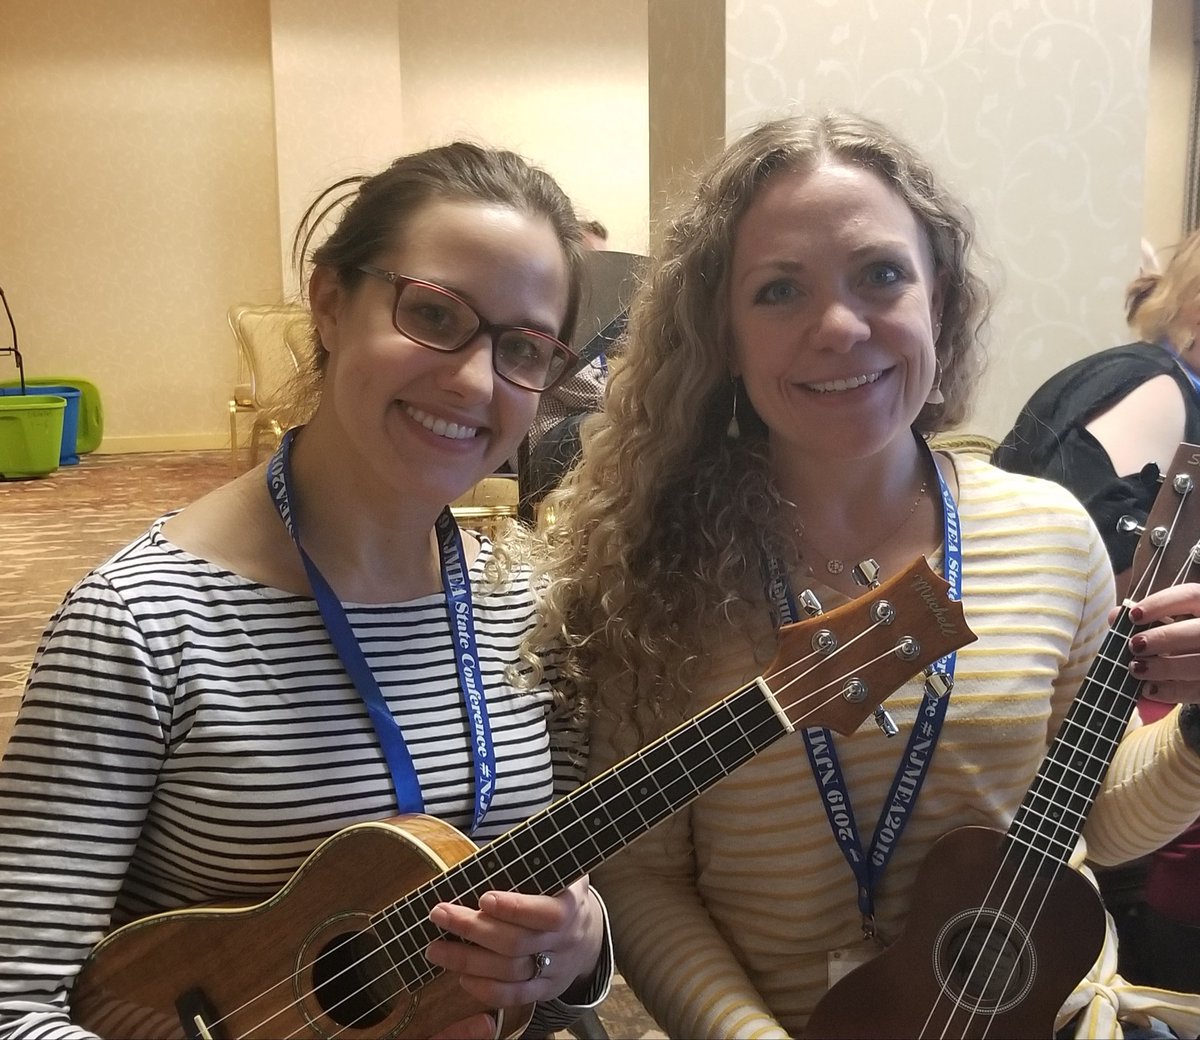 Excited to share everything we've learned at @NJMEA convention this year! #twinning #silvershinesPRS #silvershinesMPS @PointRoad2 @Warrior_News